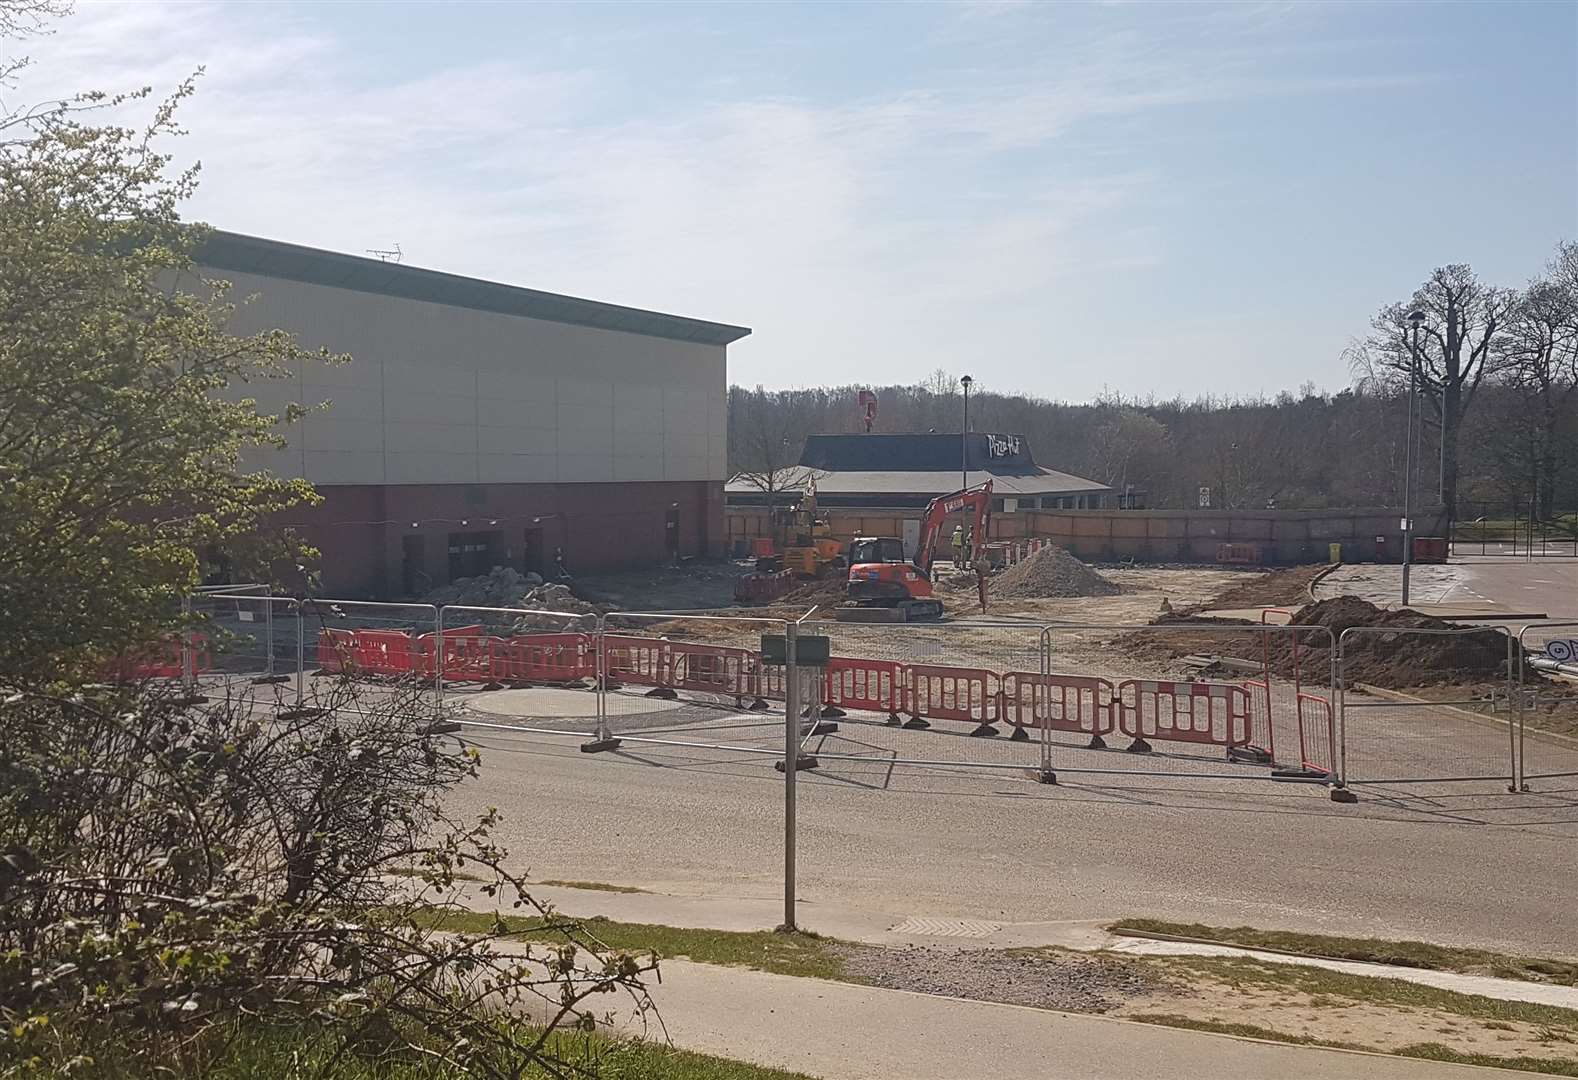 Contractors were seen working on the site yesterday